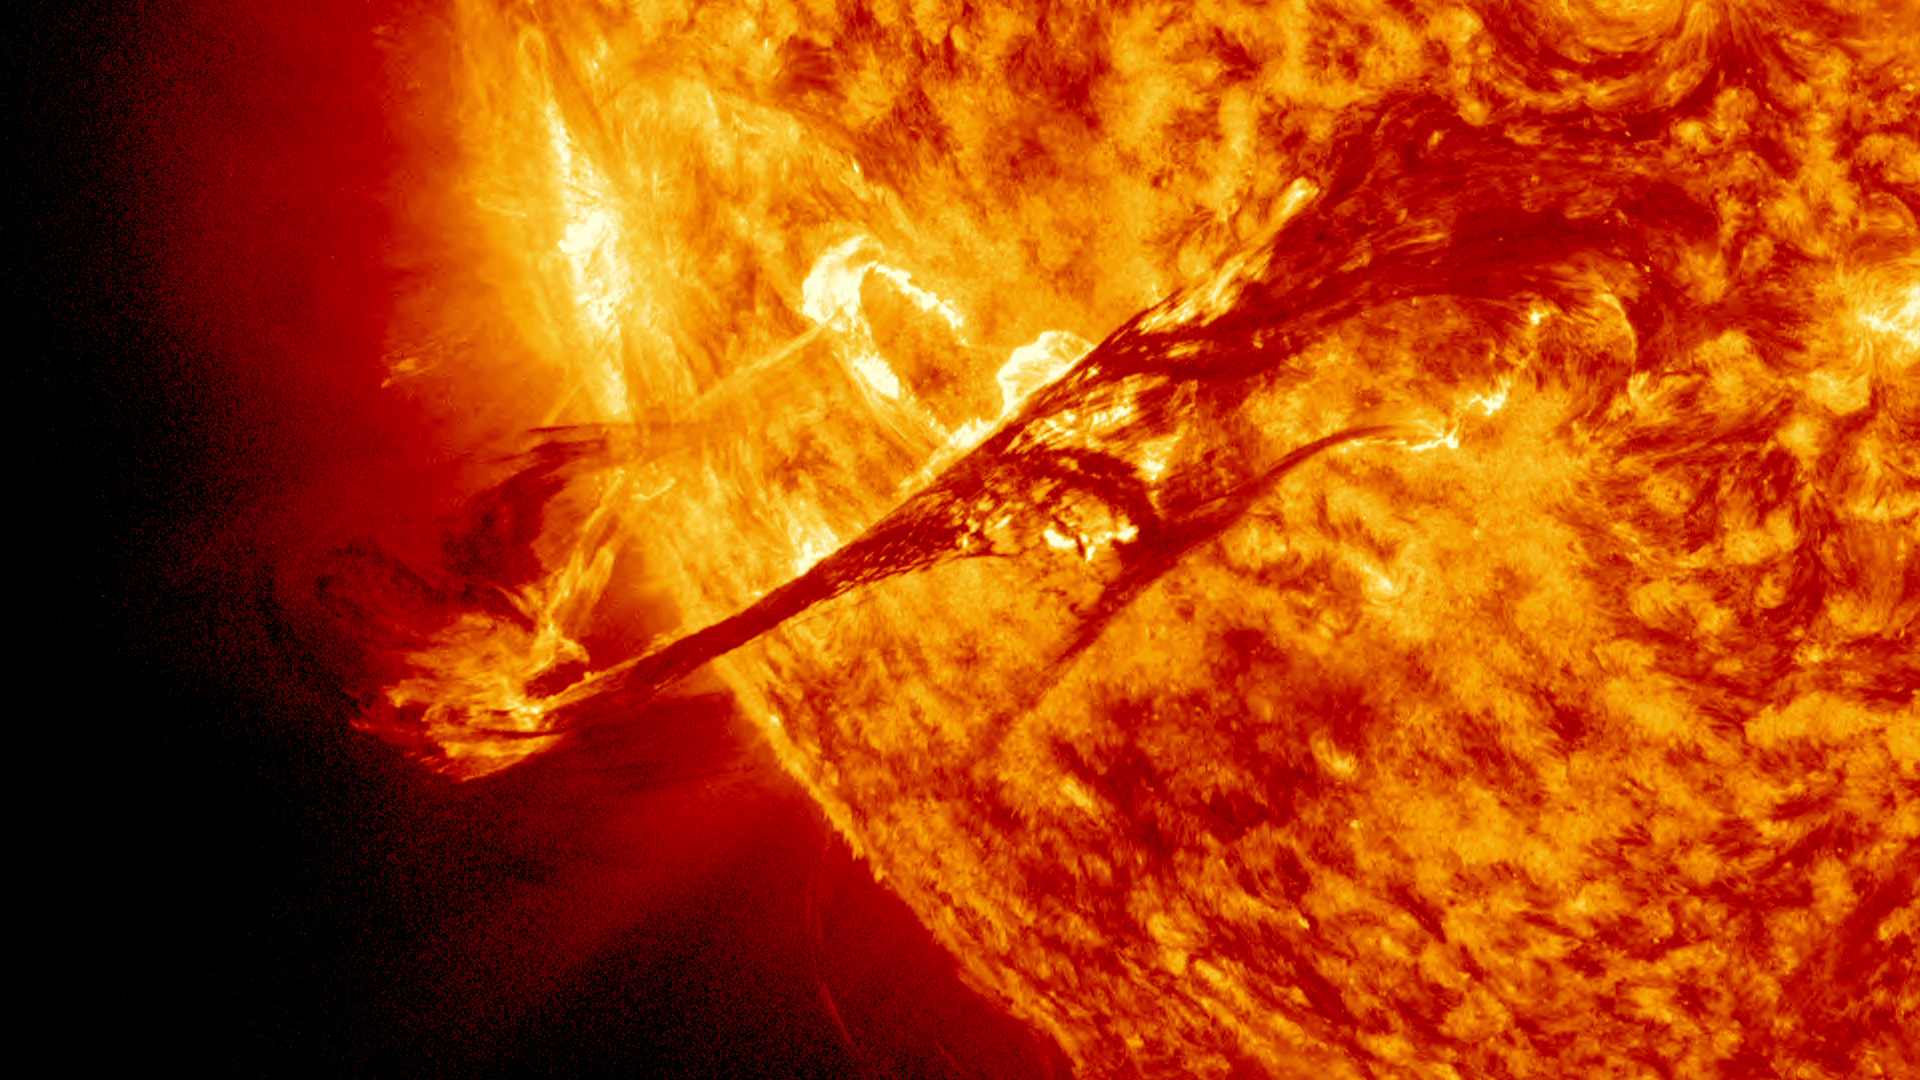 a raging fiery yellow and organge sun blazes from the right, filling two-thirds of the image. the star spits an arch of plasma high above its surface. so hot